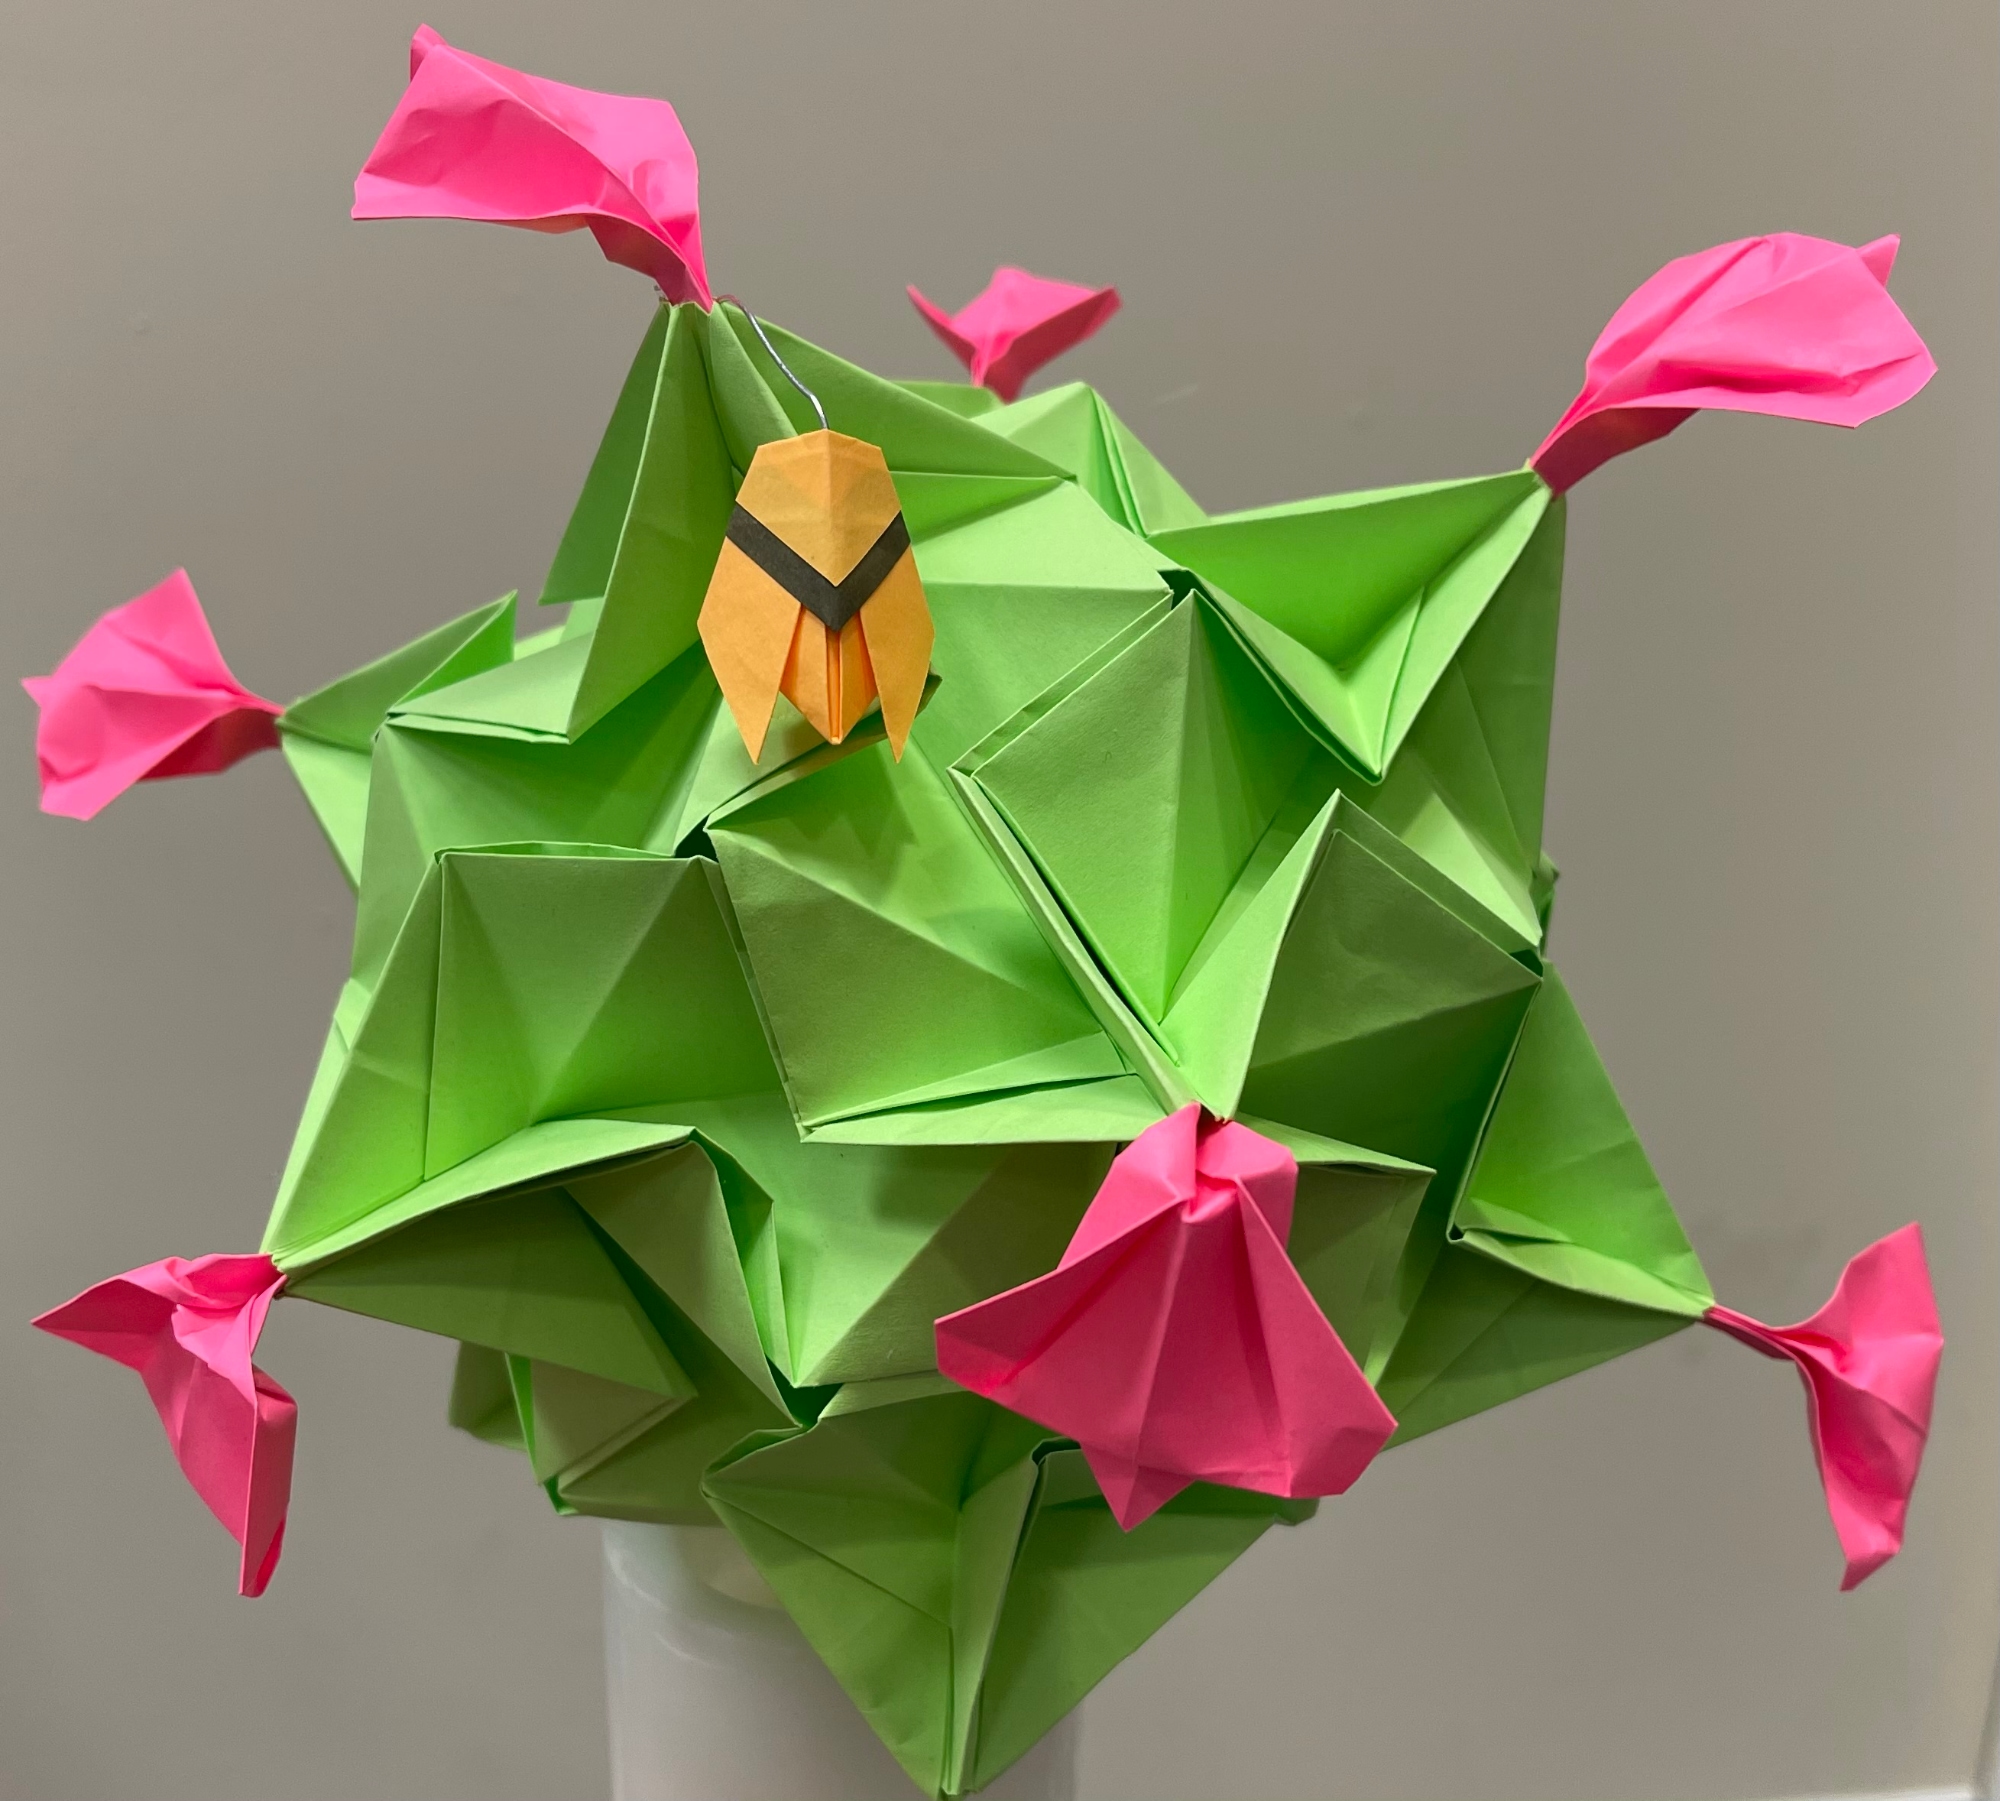 Nature Connection | Origami, 2022 | Rylan Sturm